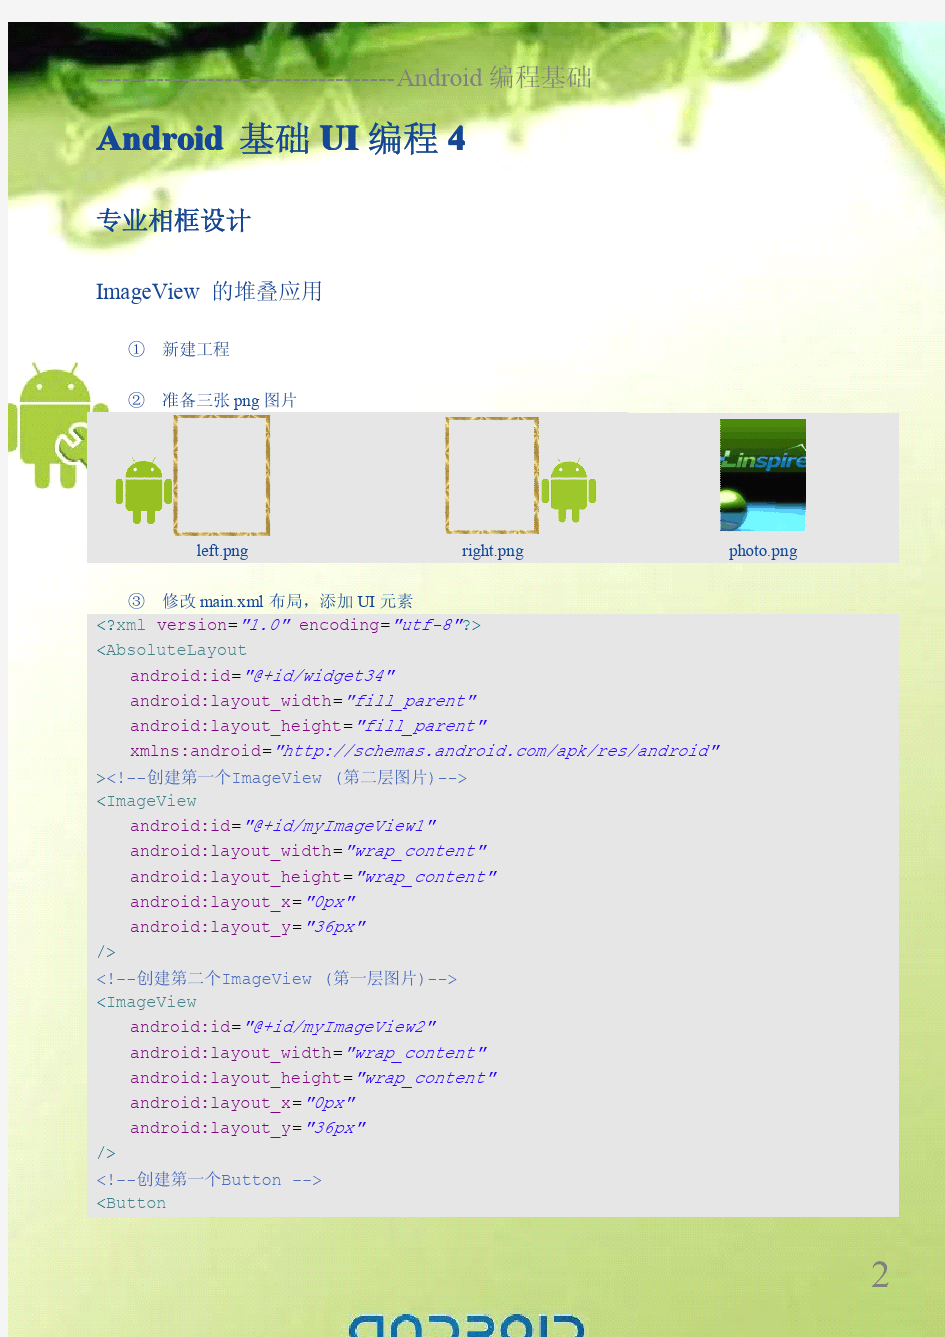 Android开发教程+笔记十--基础UI编程4